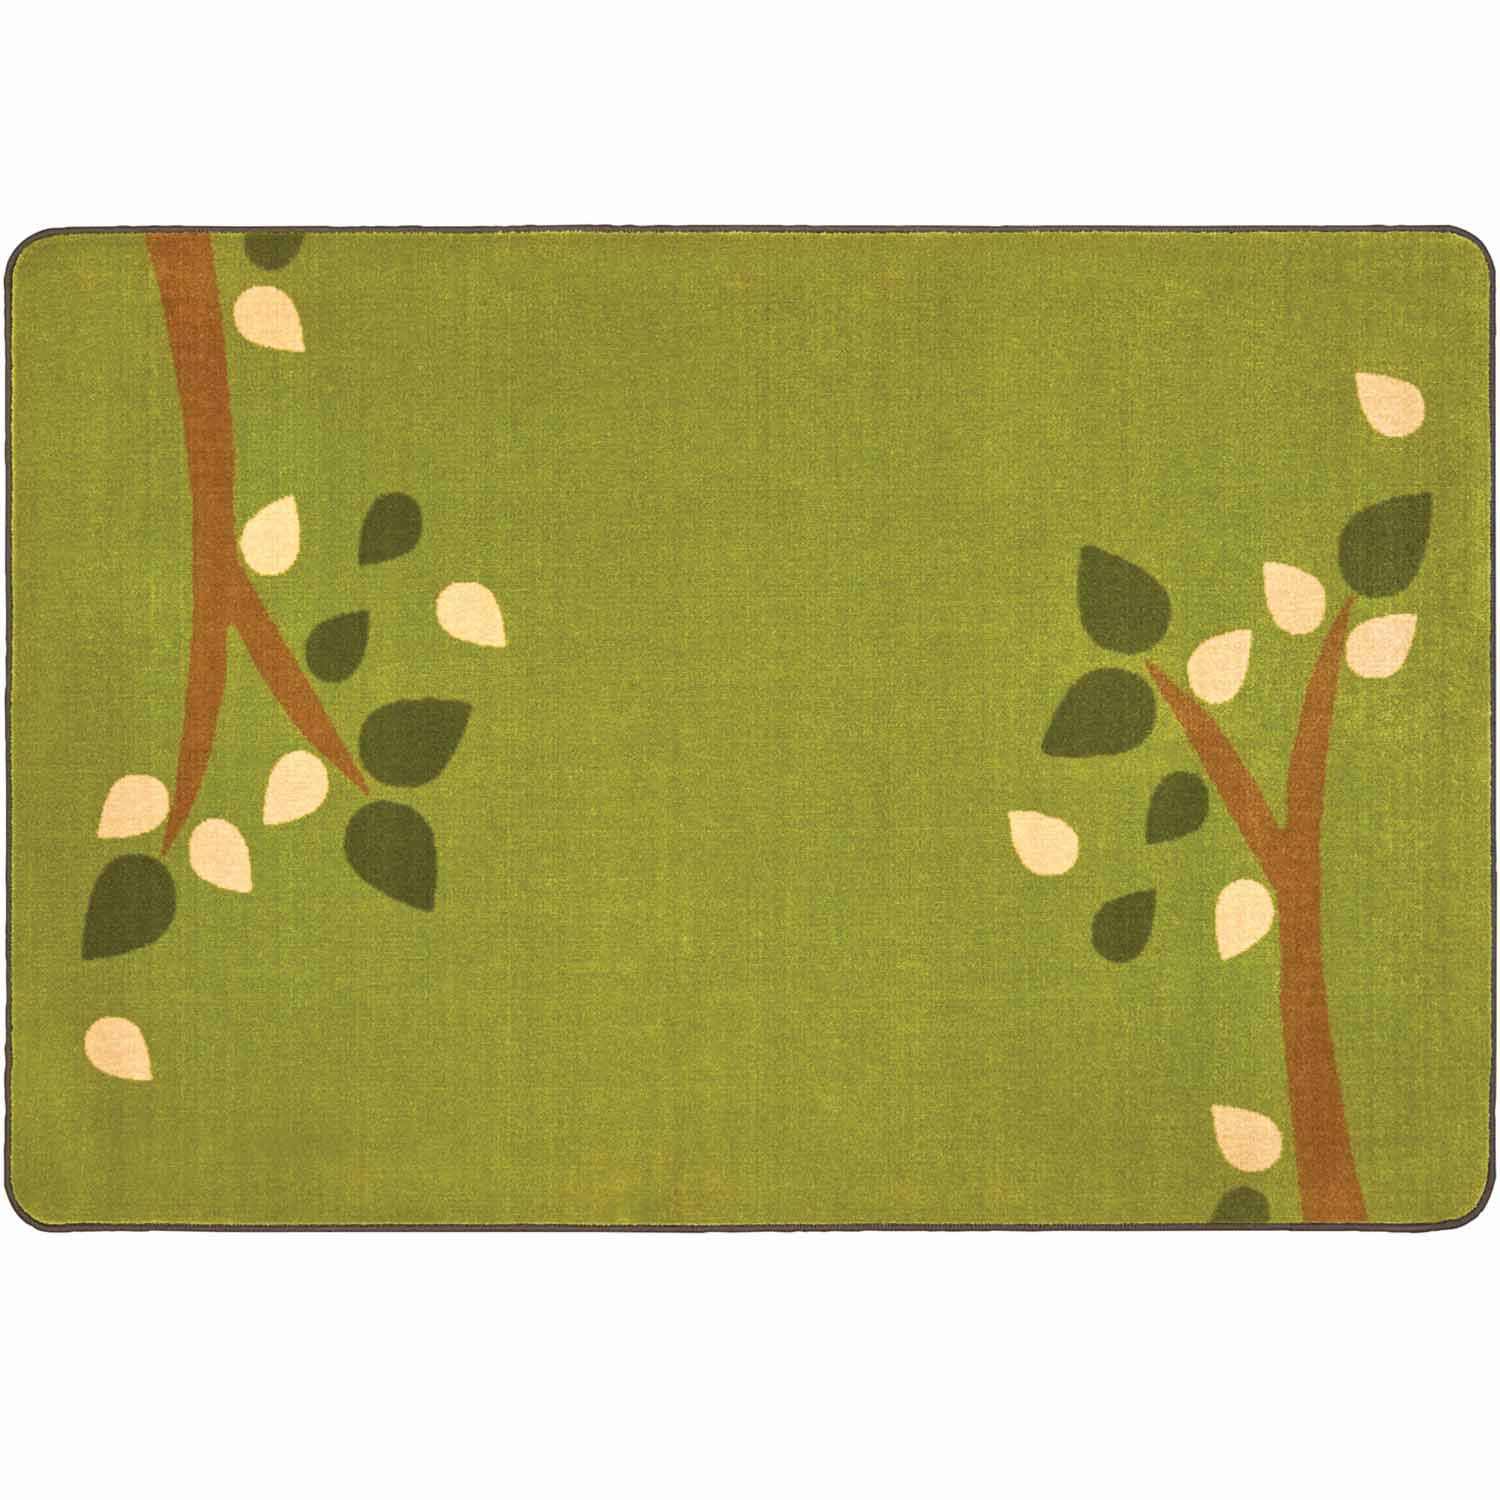 KIDSoft™ Branching Out Rug, Green, Rectangle 8' x 12'